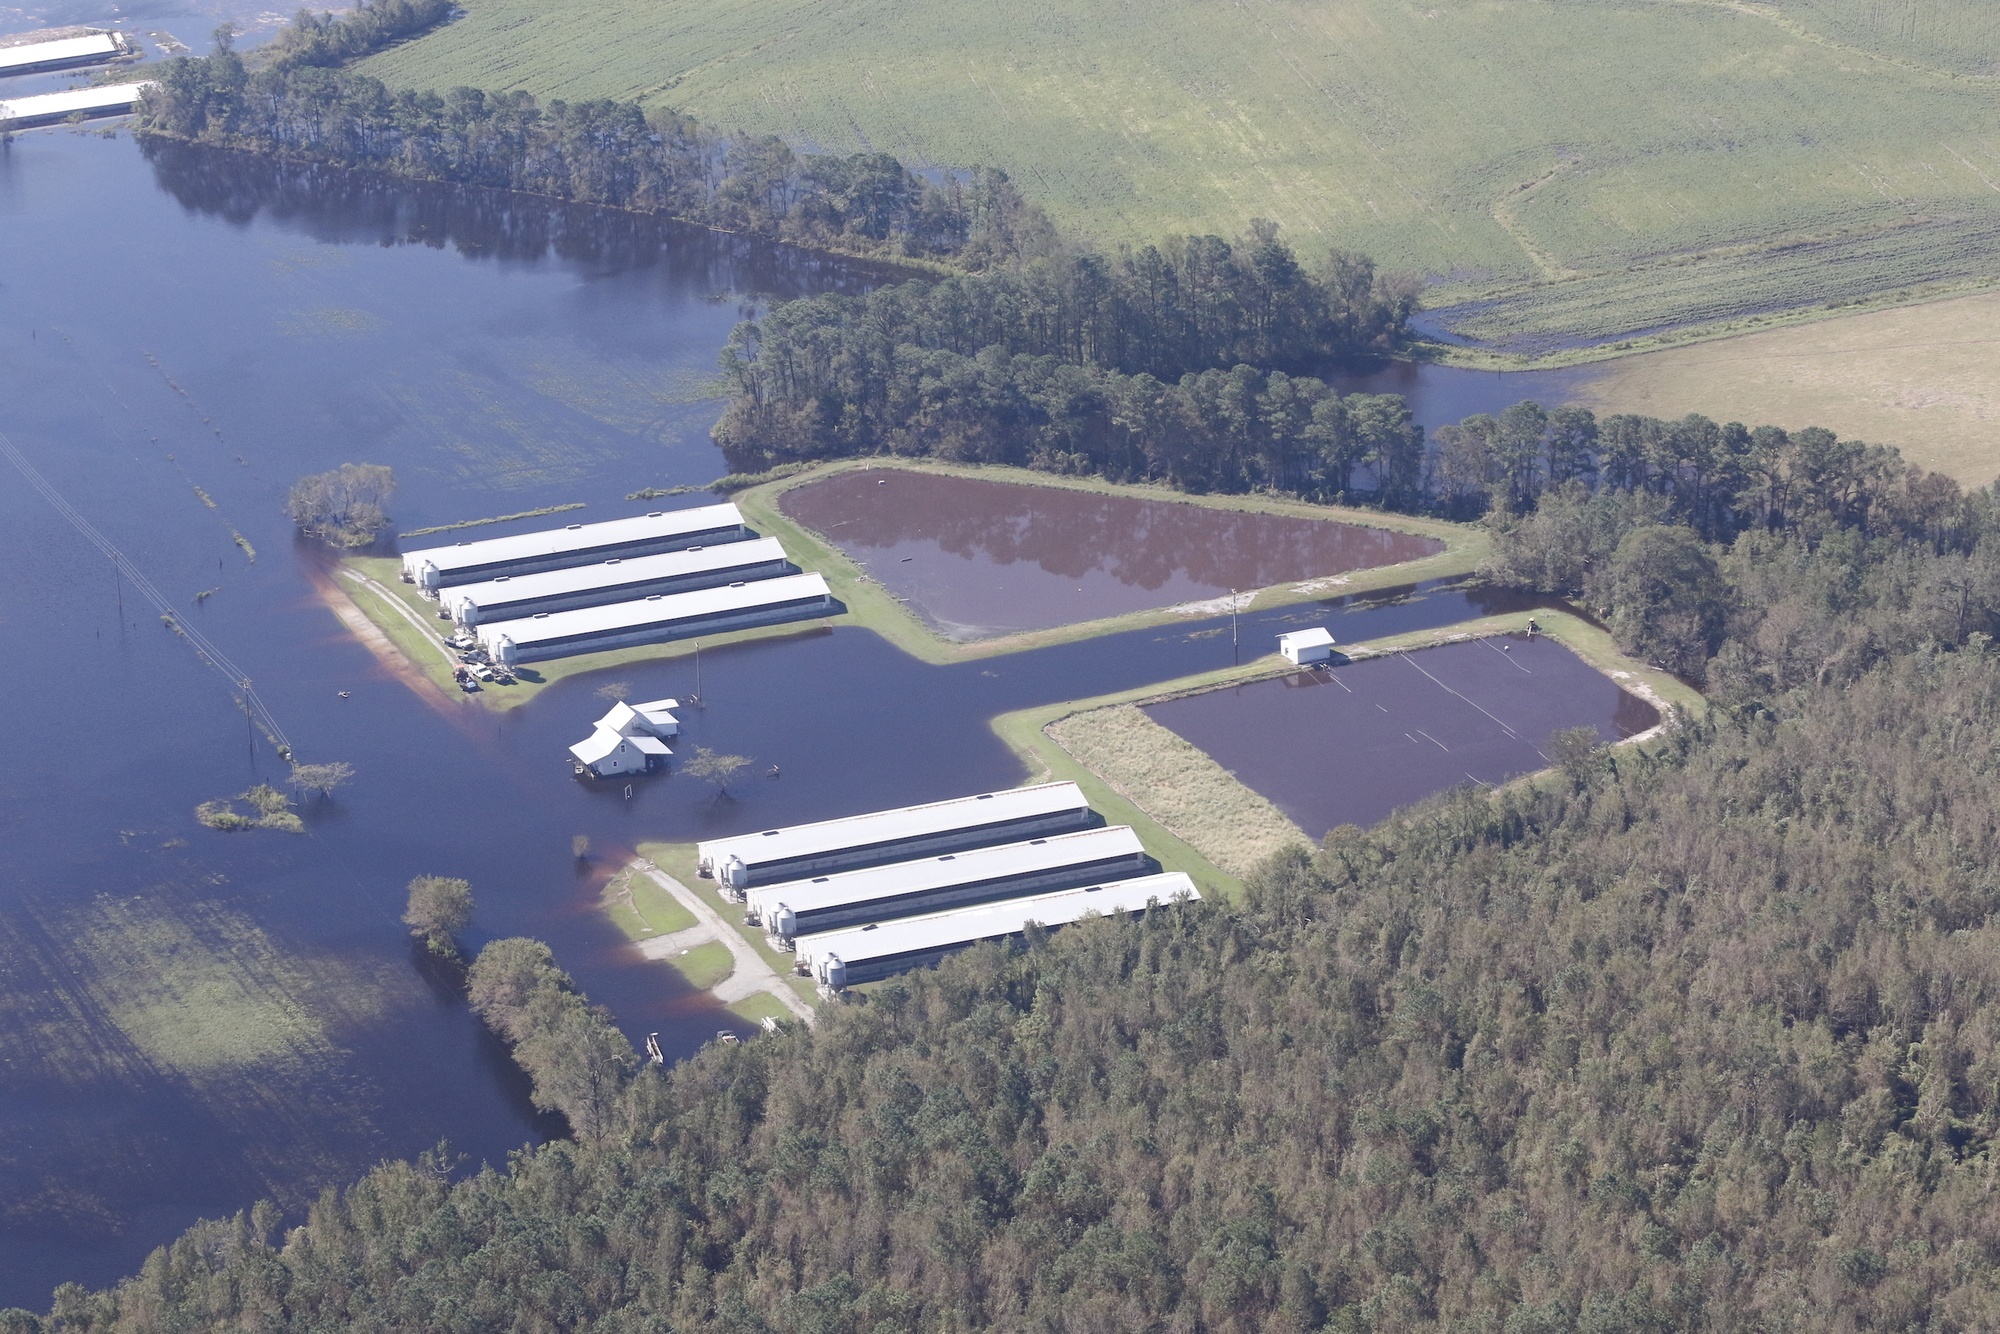 Aerial view of a CAFO hog farm in North Carolina flooding after a Hurricane in 2018.